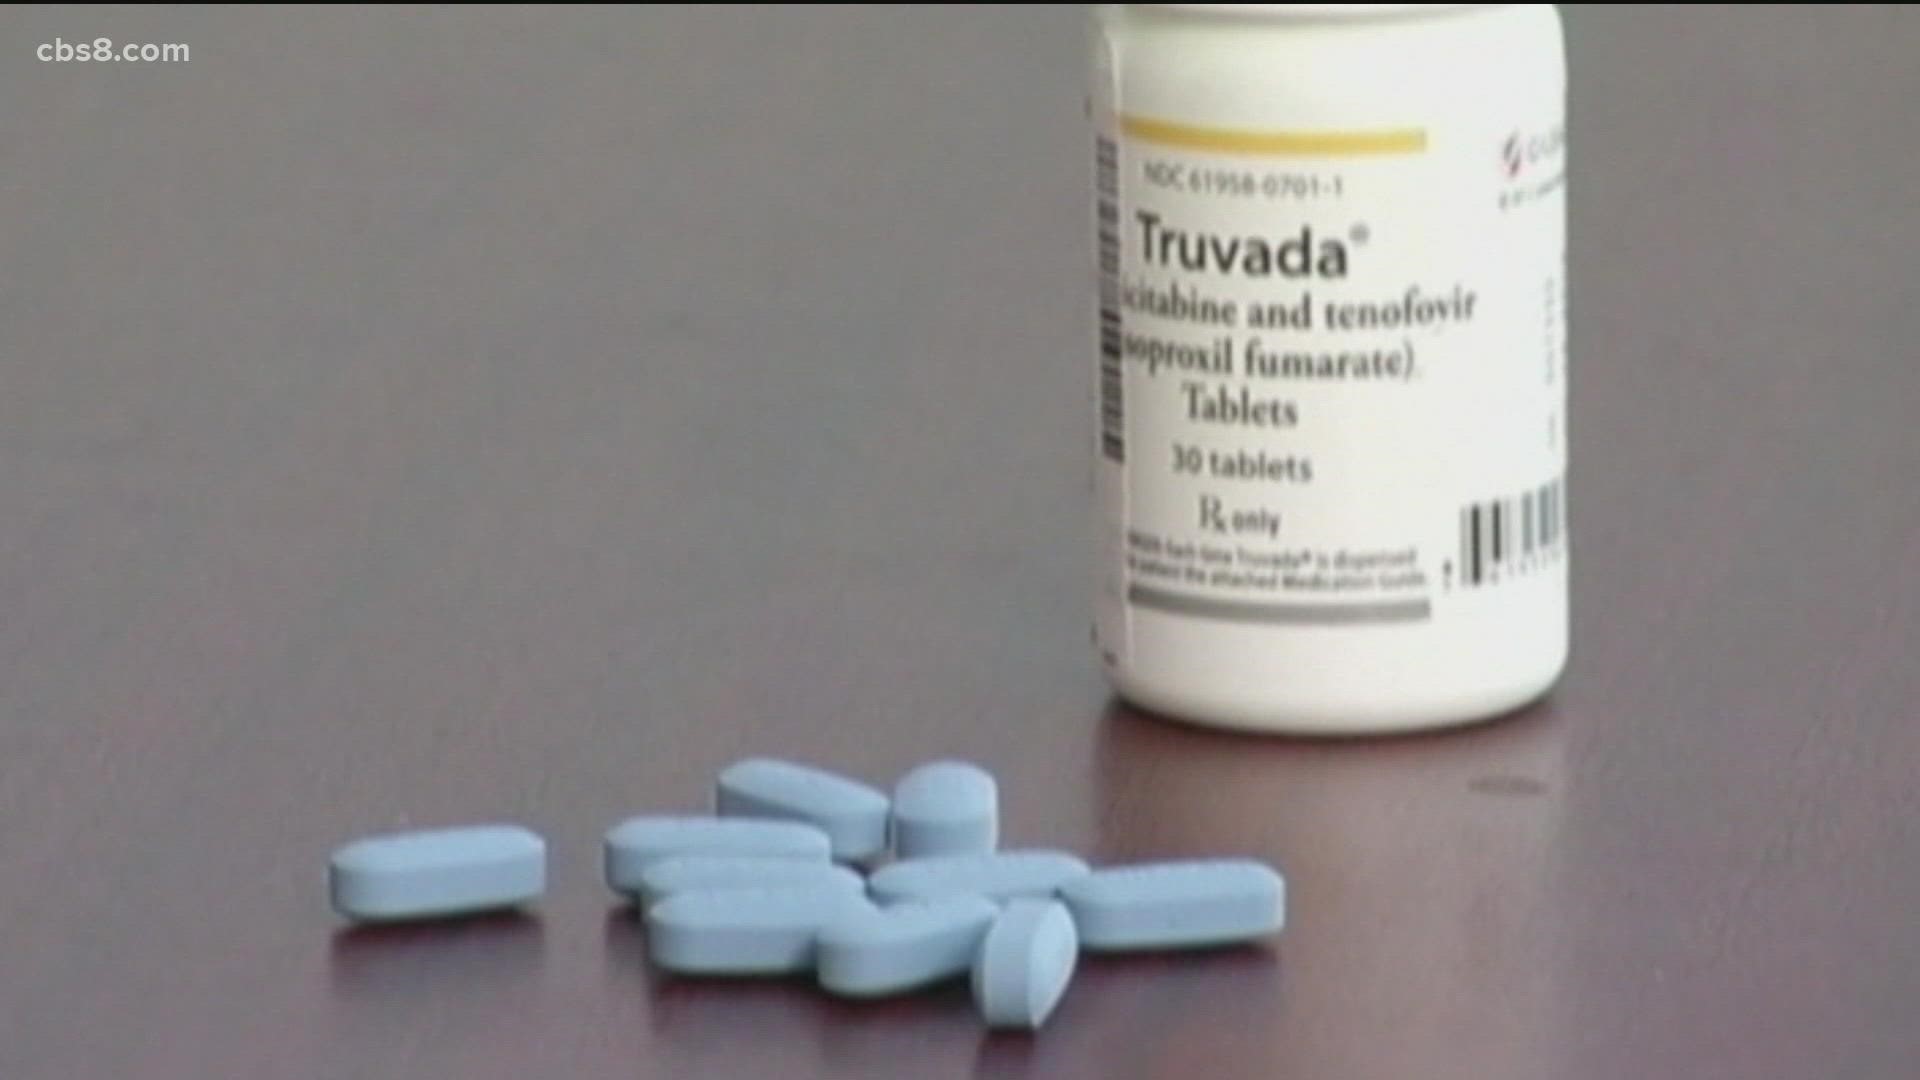 So-called "drug tourism" may be fueling a new HIV outbreak in Tijuana, unabated by the closure of the international border due to the COVID-19 pandemic.